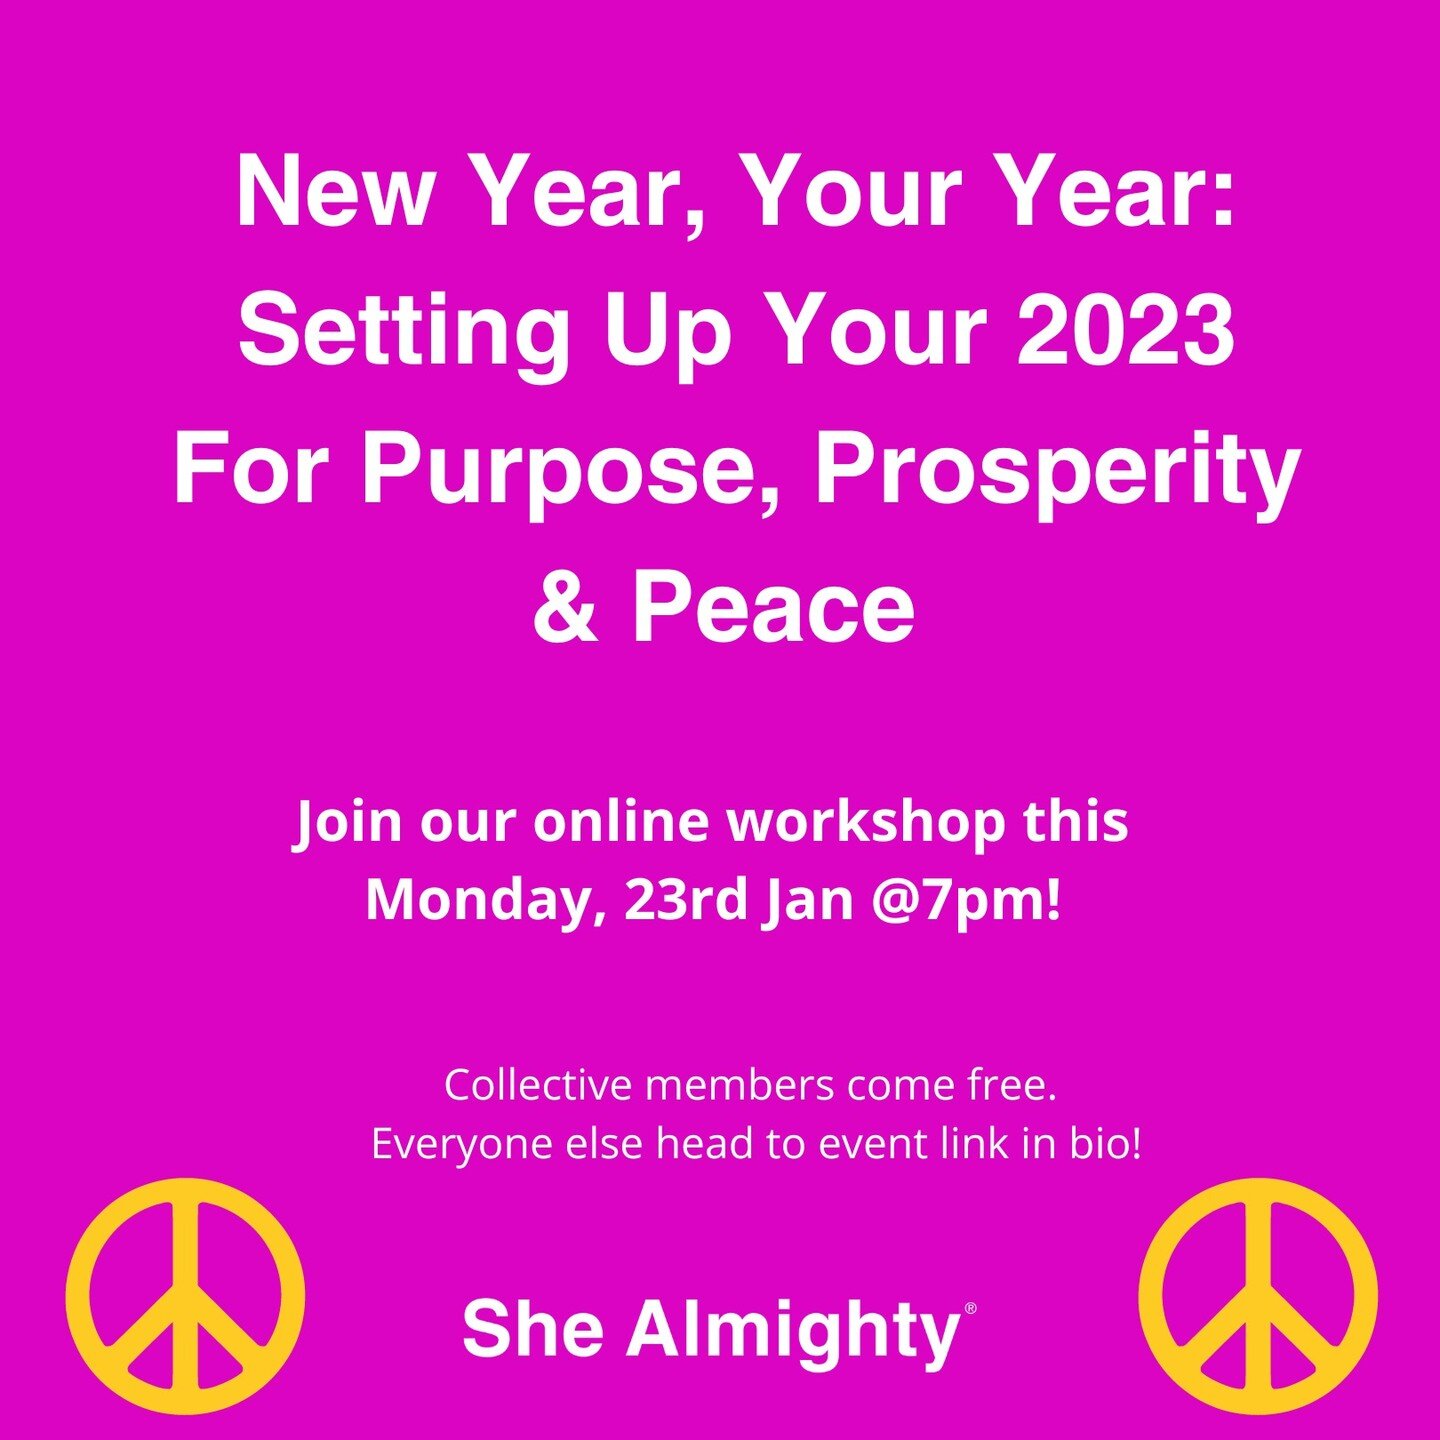 Ready to connect with what you want for your 2023, to live in your purpose, prosperity, peace and truly thrive? ✨

We've got you!

At She Almighty, we don&rsquo;t settle for anything less than our best. 

We don&rsquo;t put up, we take control and we